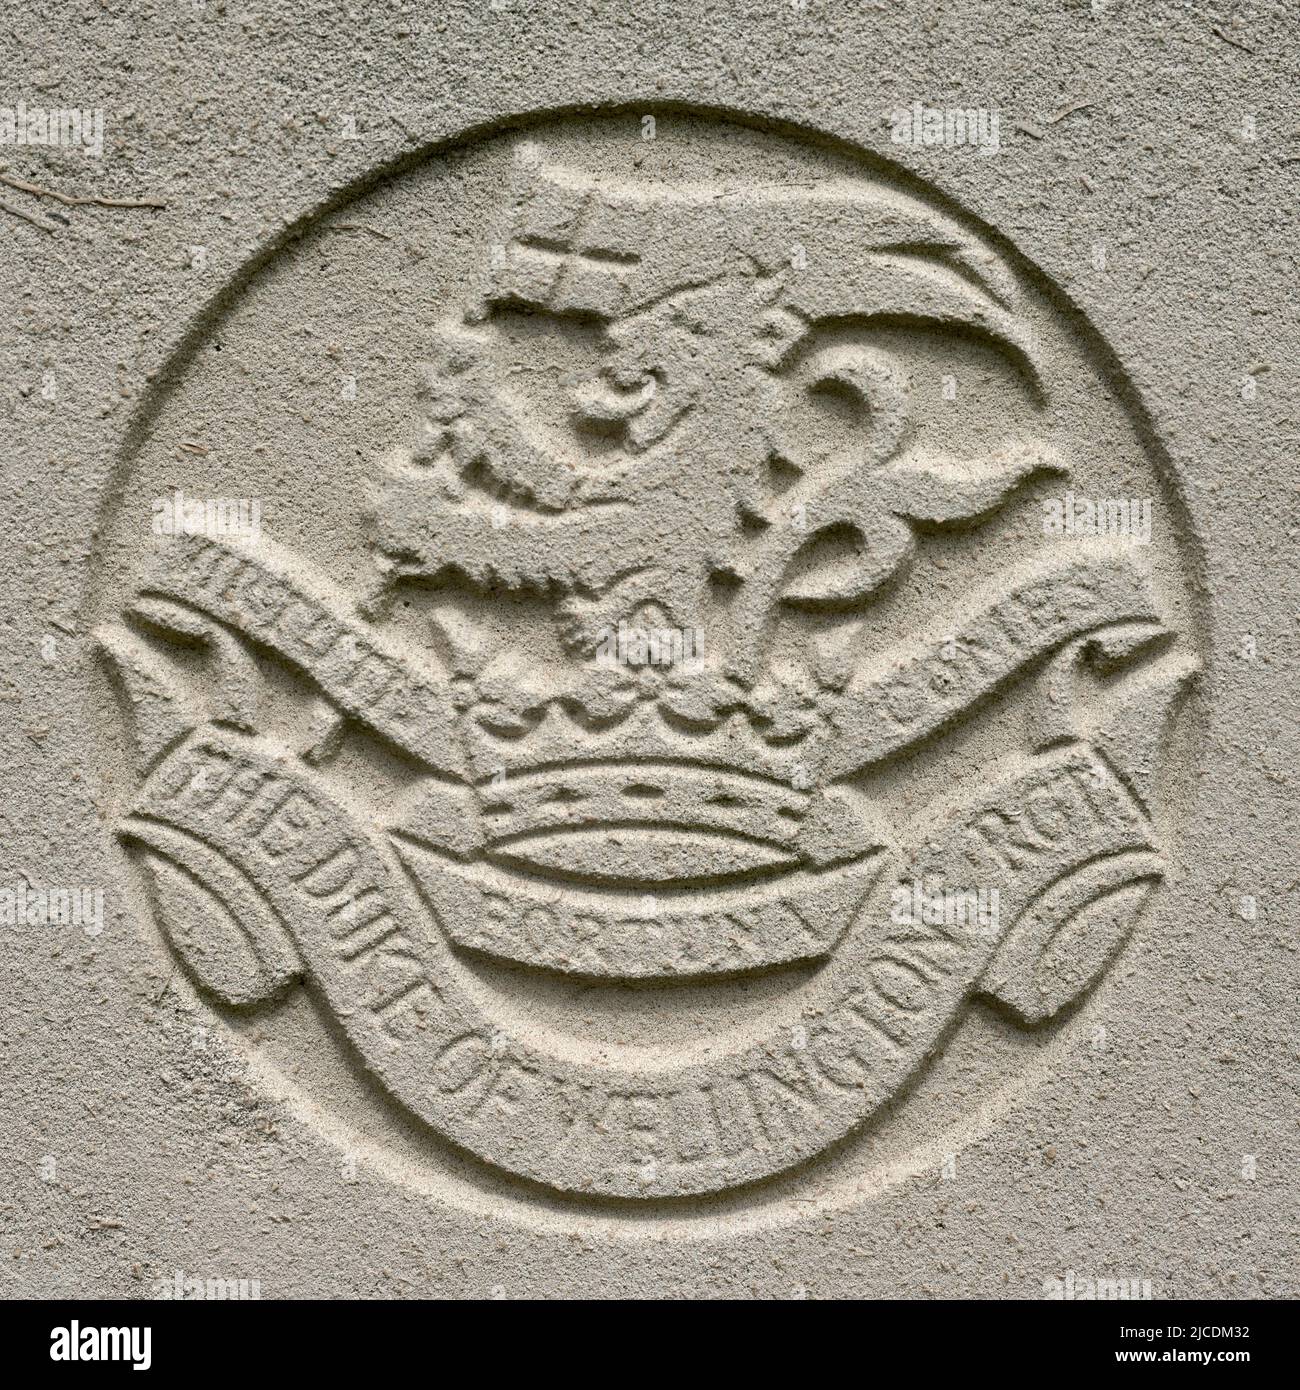 Military insignia of the WW2 - military emblem of the British Army on a soldier's headstone - The Duke of Wellington’s Regiment Stock Photo